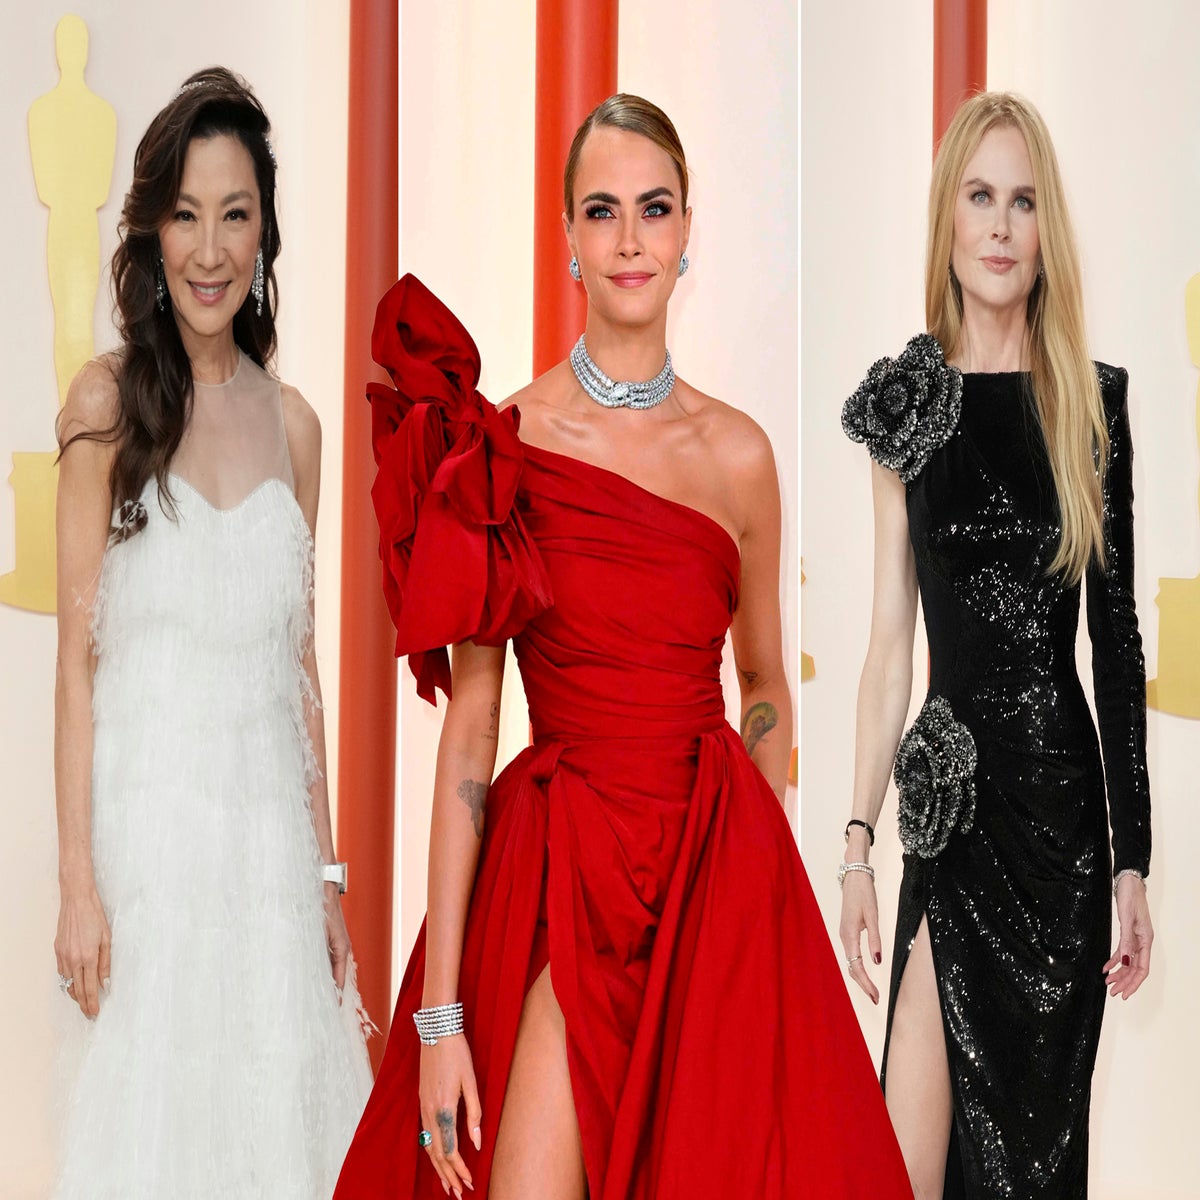 Red Carpet Fashion, News, Photos and Videos